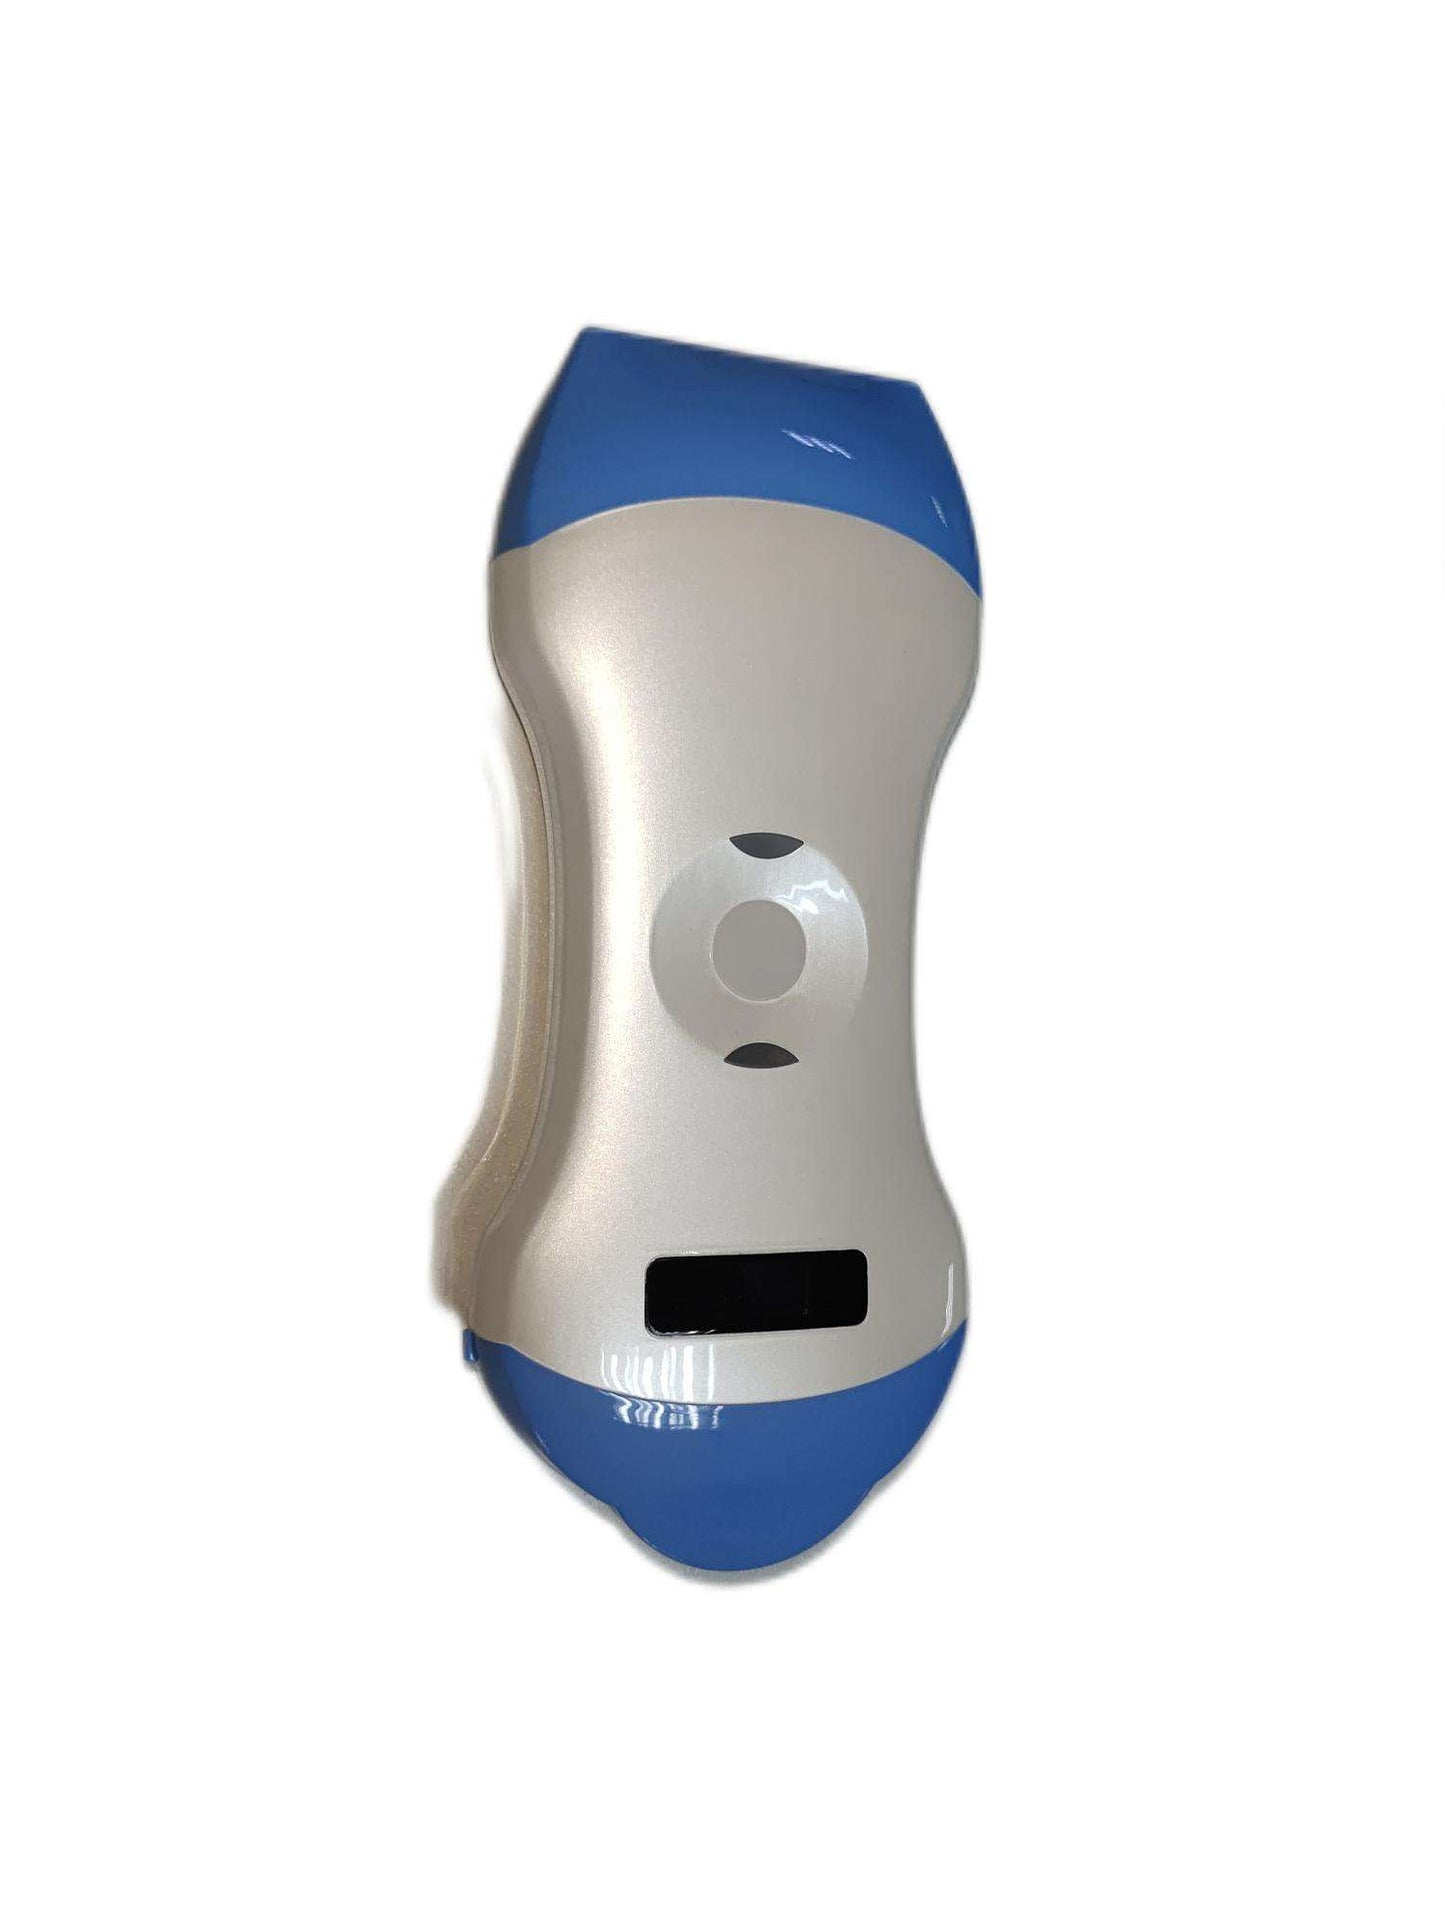 OEM/ODM Wireless Handheld Medical Ultrasound Instruments with Optional Probes for human being animals